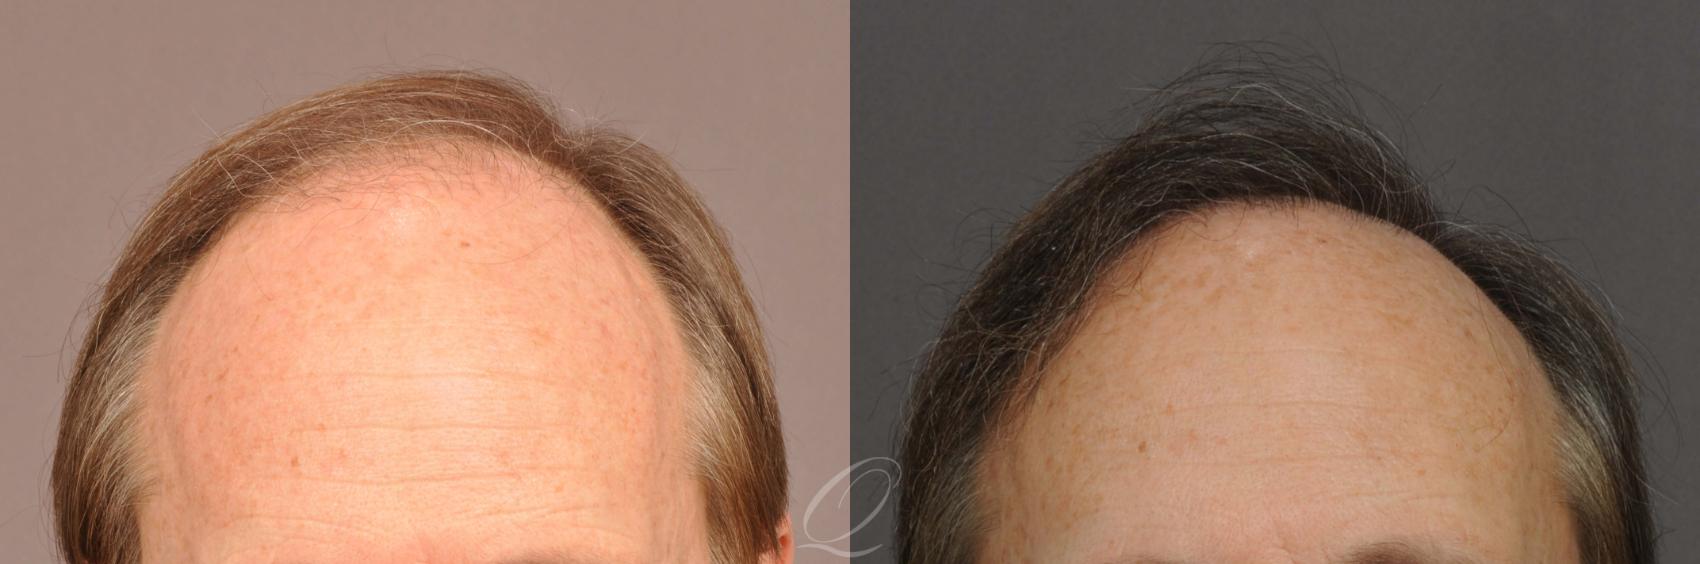 FUT Case 1021 Before & After View #1 | Rochester, NY | Quatela Center for Hair Restoration